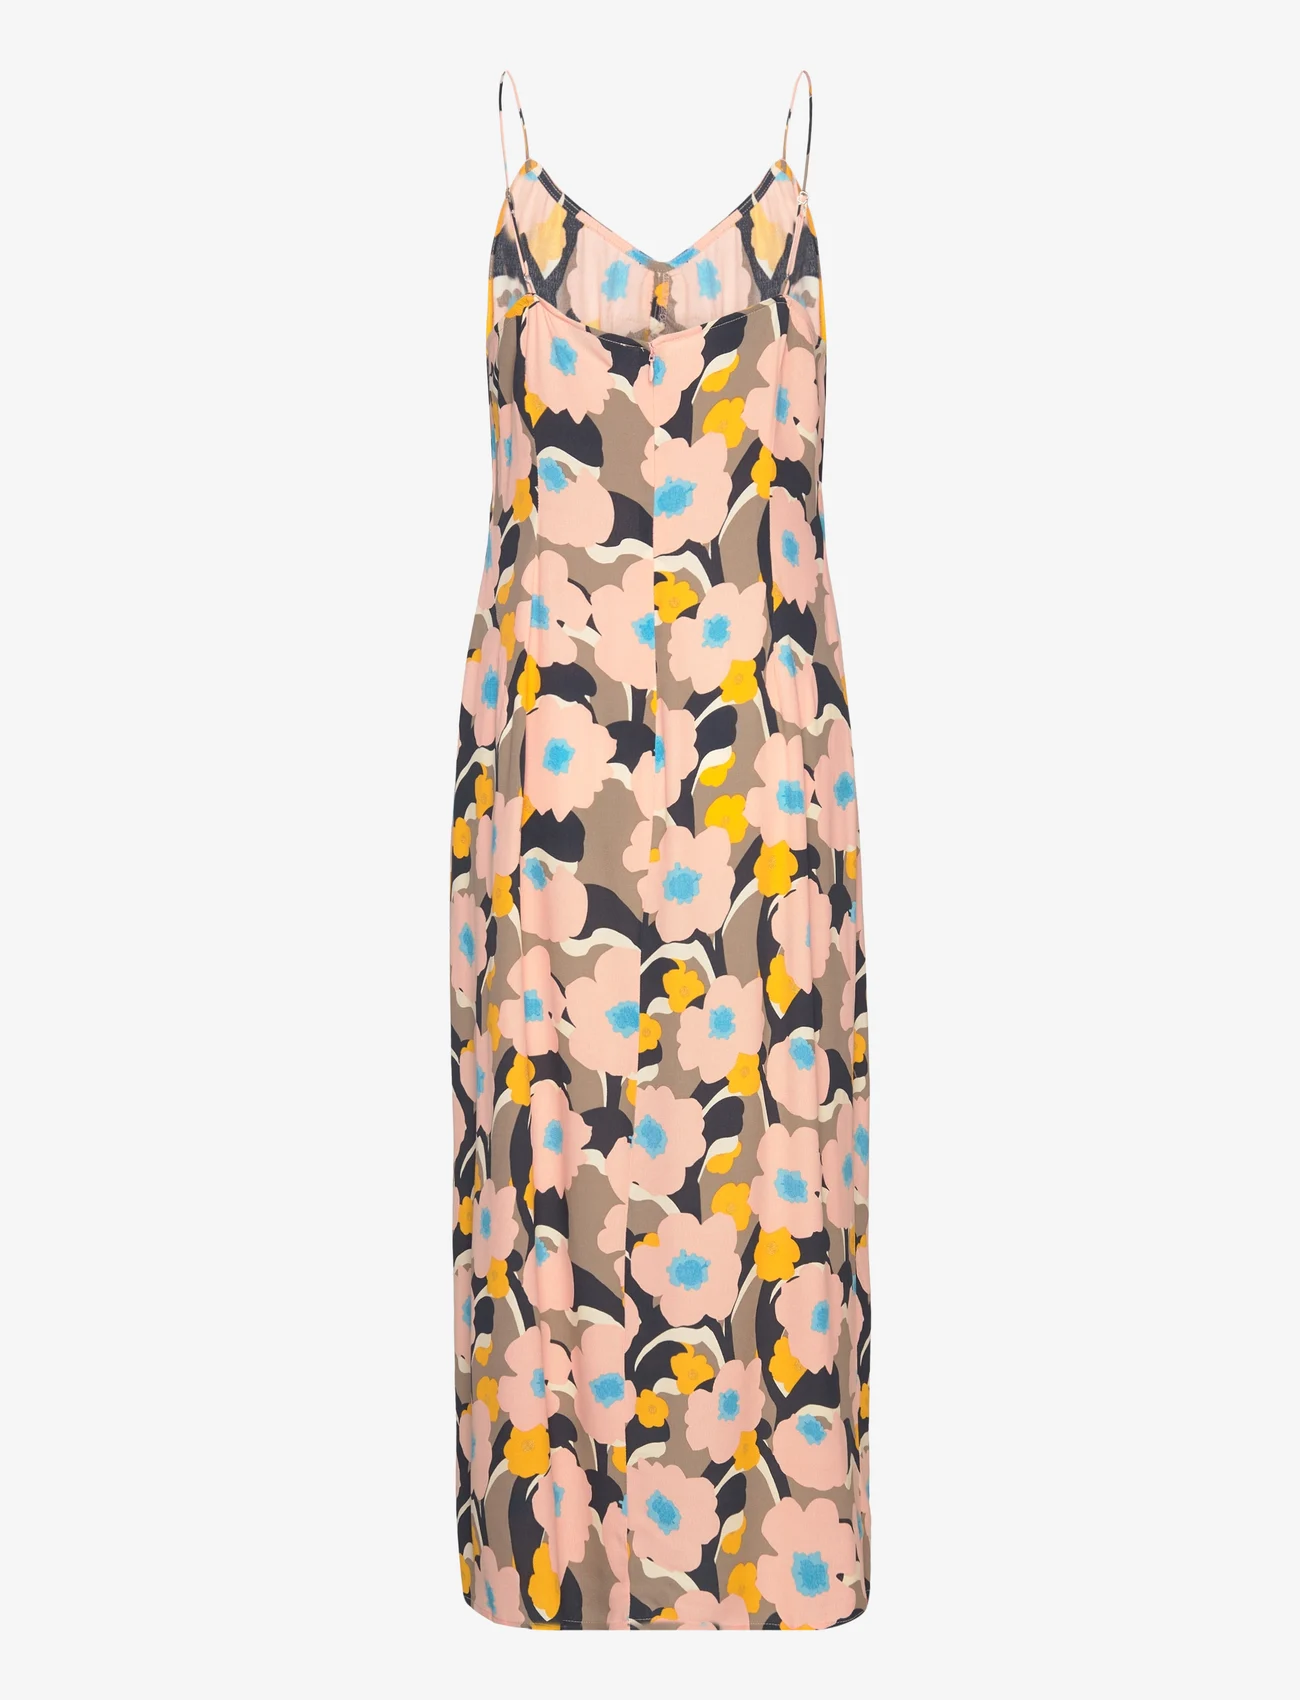 Modström - DustinMD print strap dress - party wear at outlet prices - sunset bouquet - 1